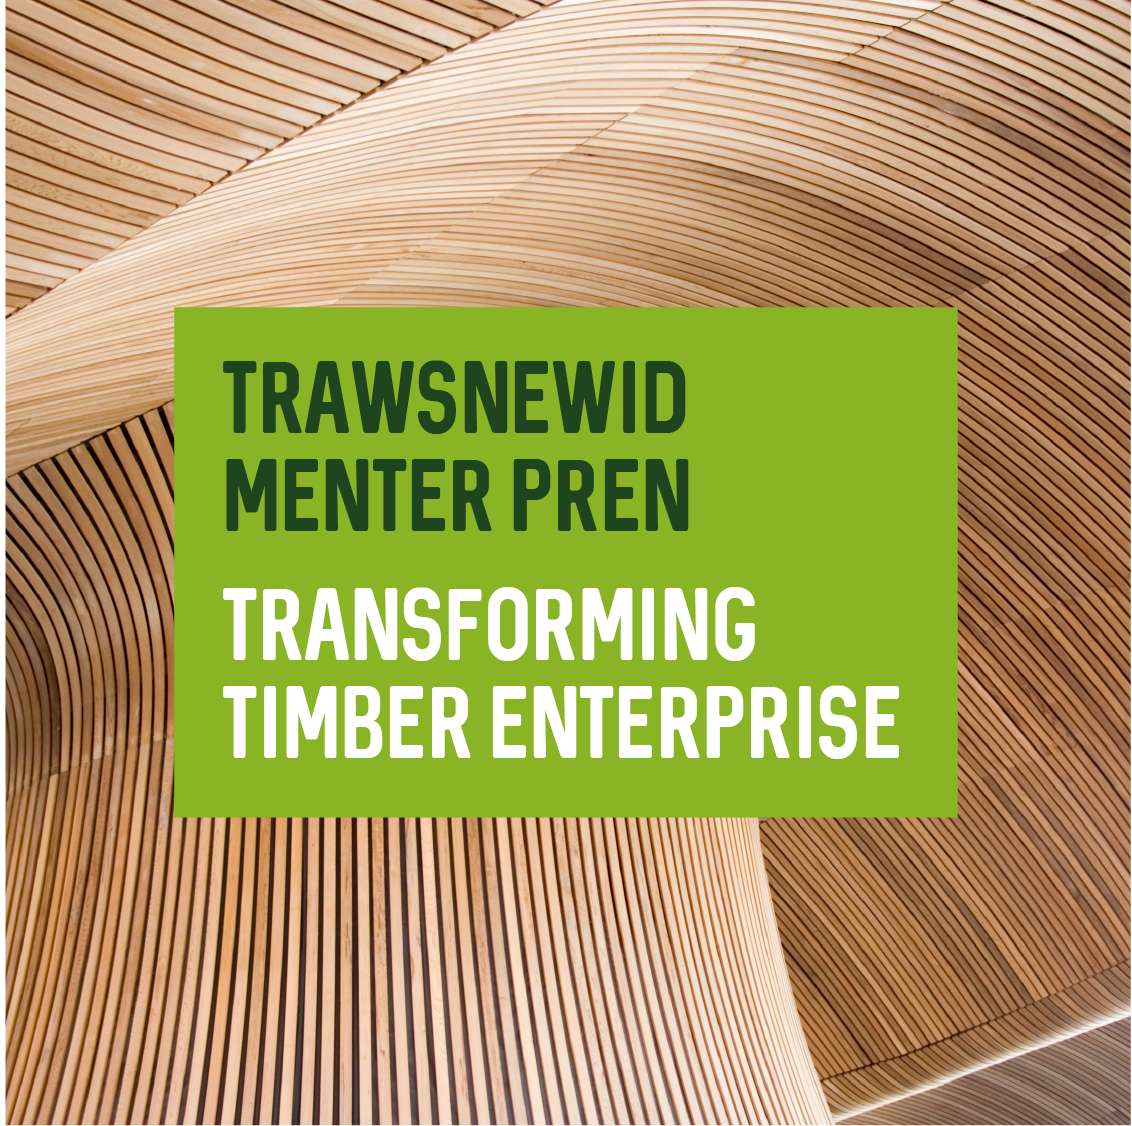 timber business investment scheme wales